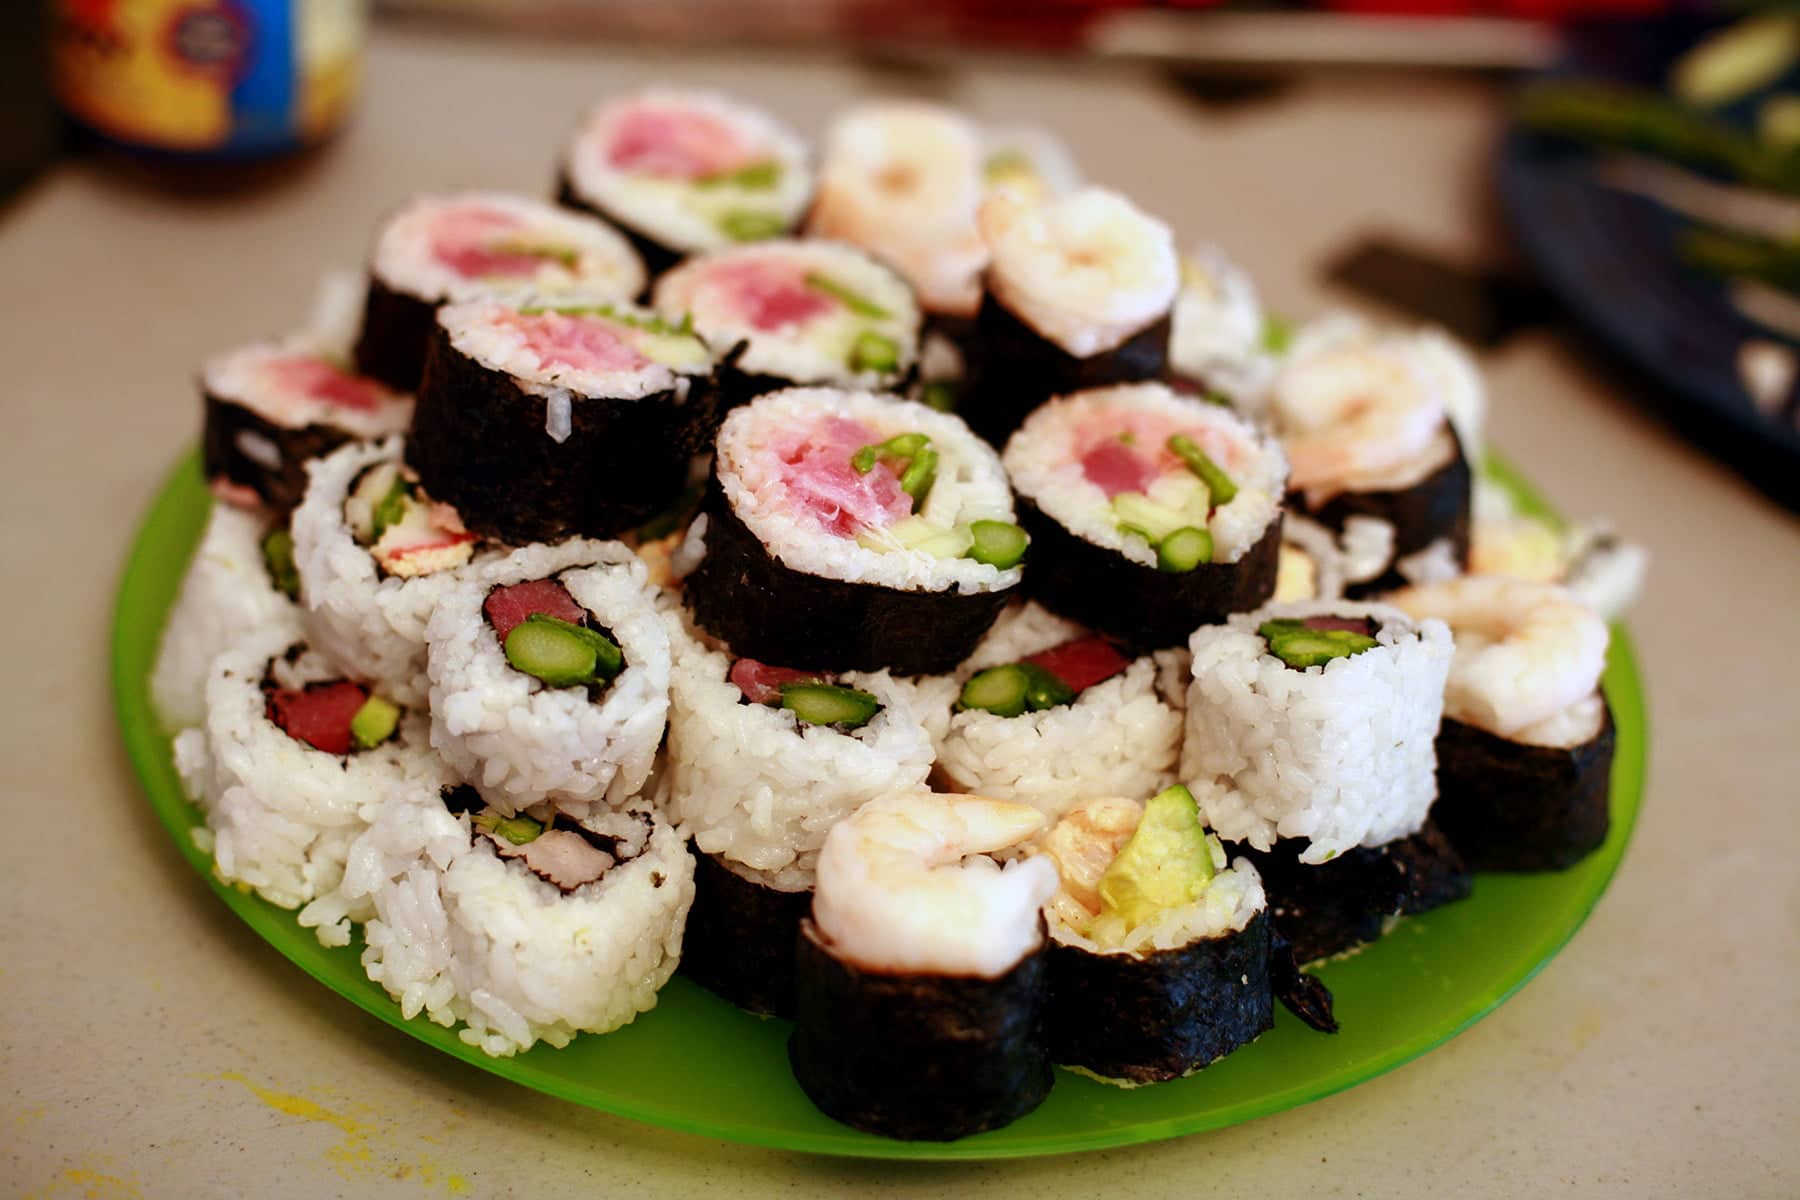 A large green plate is piled high with several different varieties of sushi roll slices.